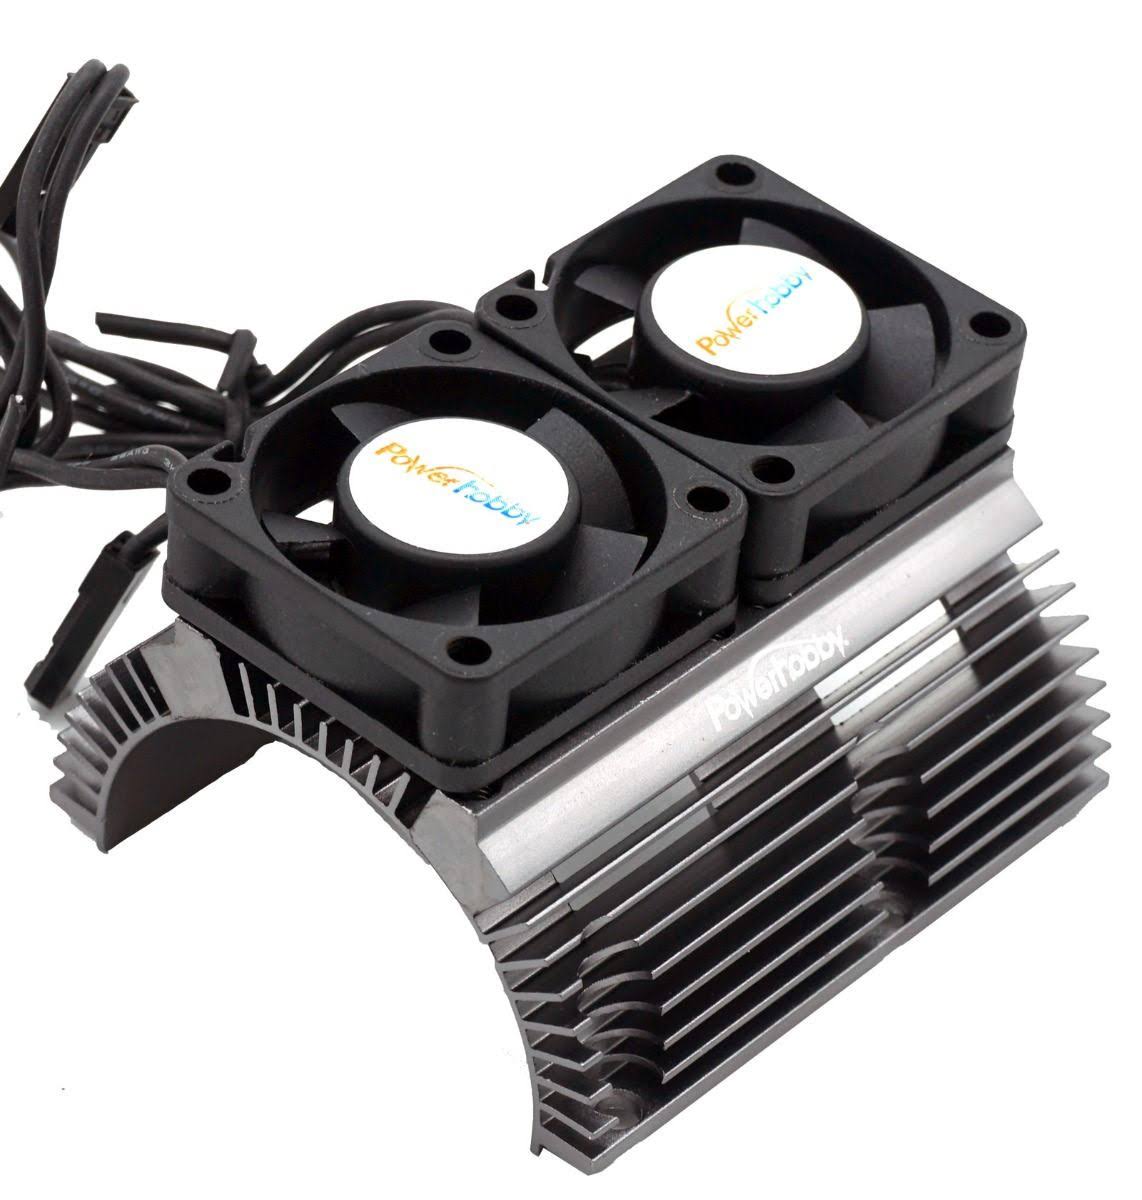 Power Hobby PHBPH1289GUN Heat Sink with Twin Turbo High Speed Cooling Fans